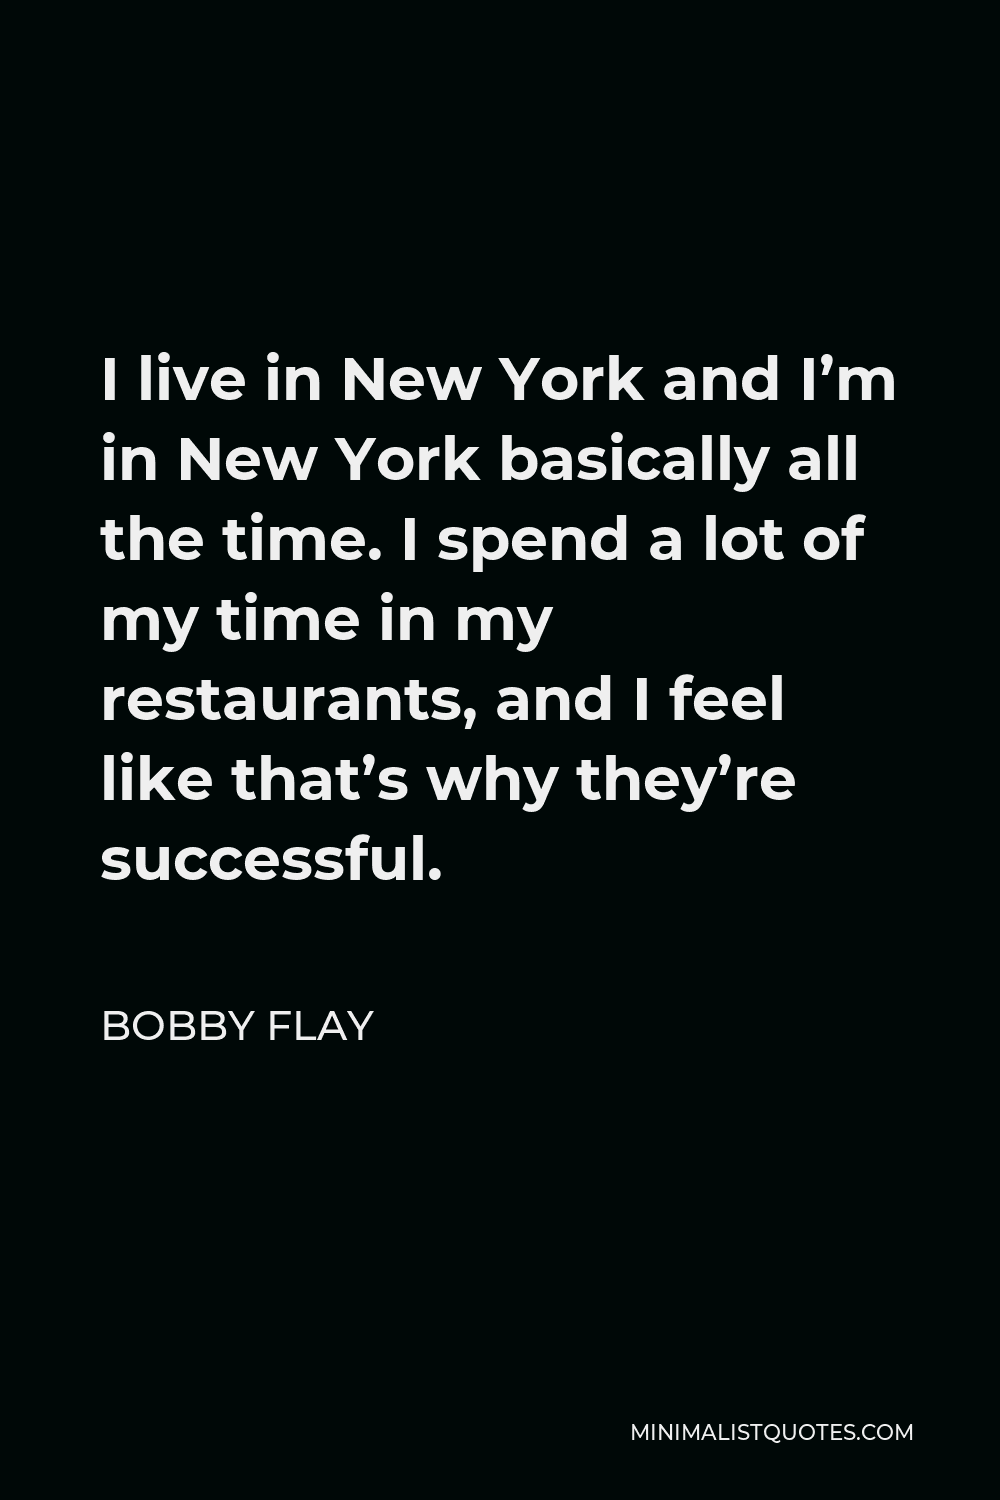 Bobby Flay Quote - I live in New York and I’m in New York basically all the time. I spend a lot of my time in my restaurants, and I feel like that’s why they’re successful.